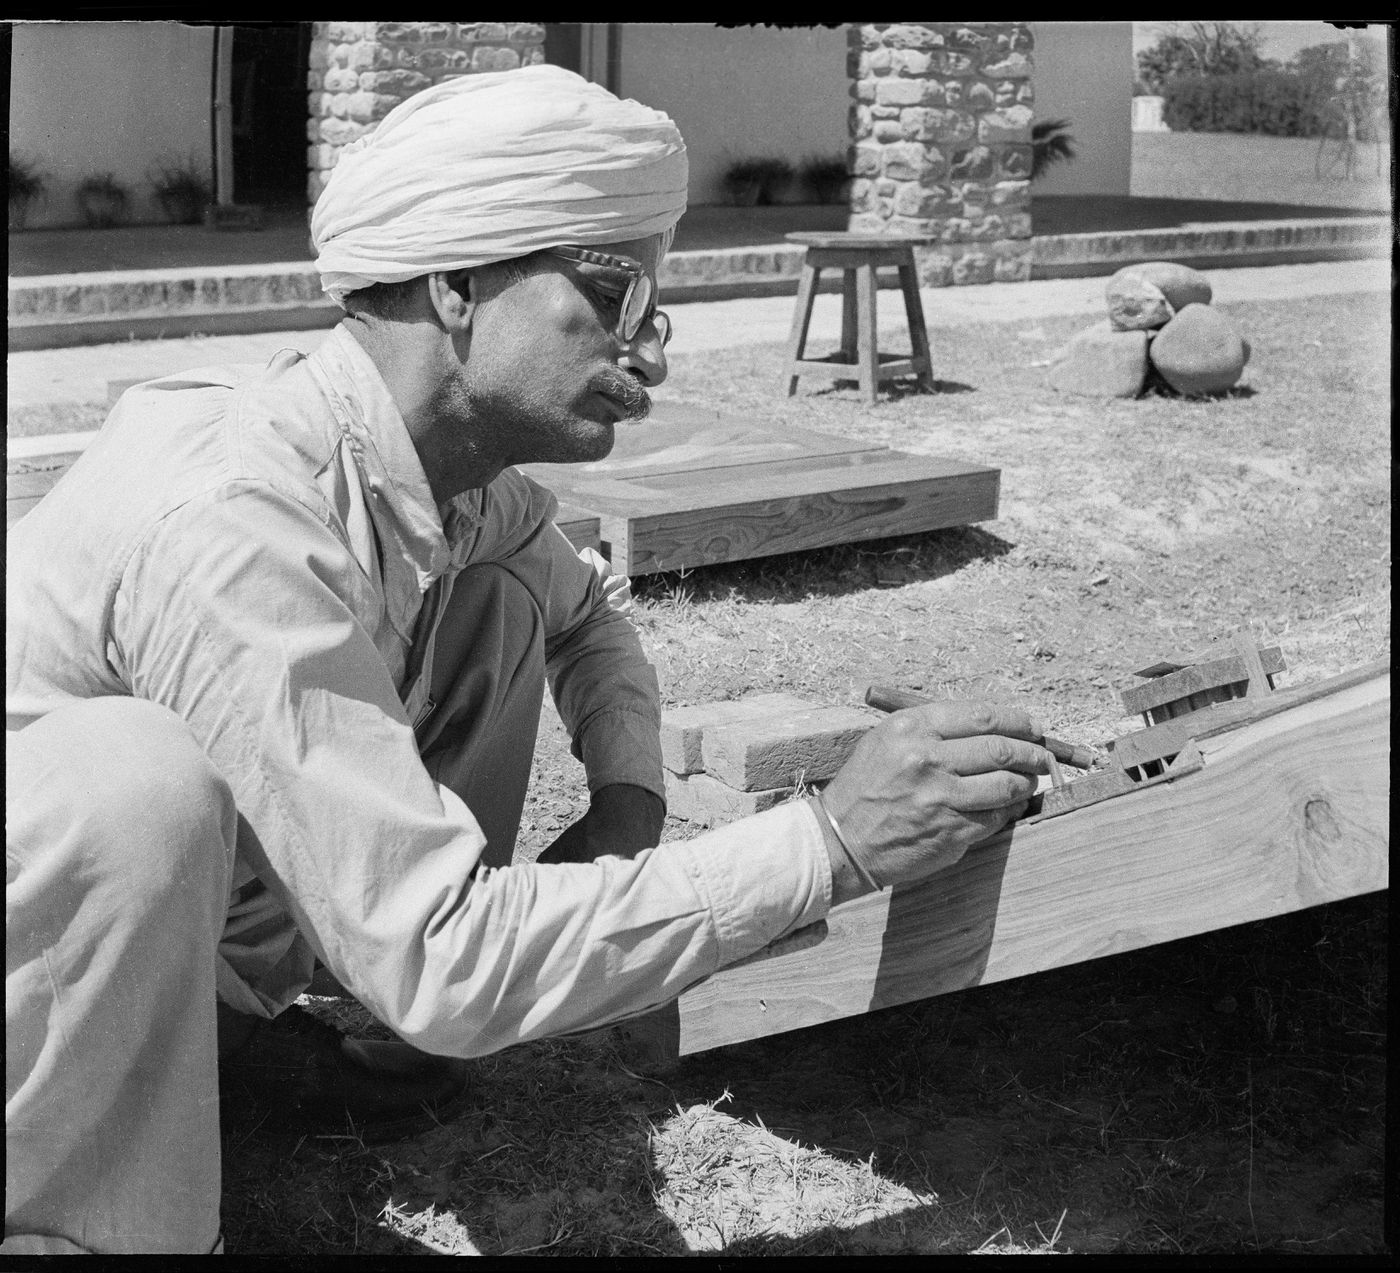 Model maker working on a component of a model for the Capitol Complex, Chandigarh, India